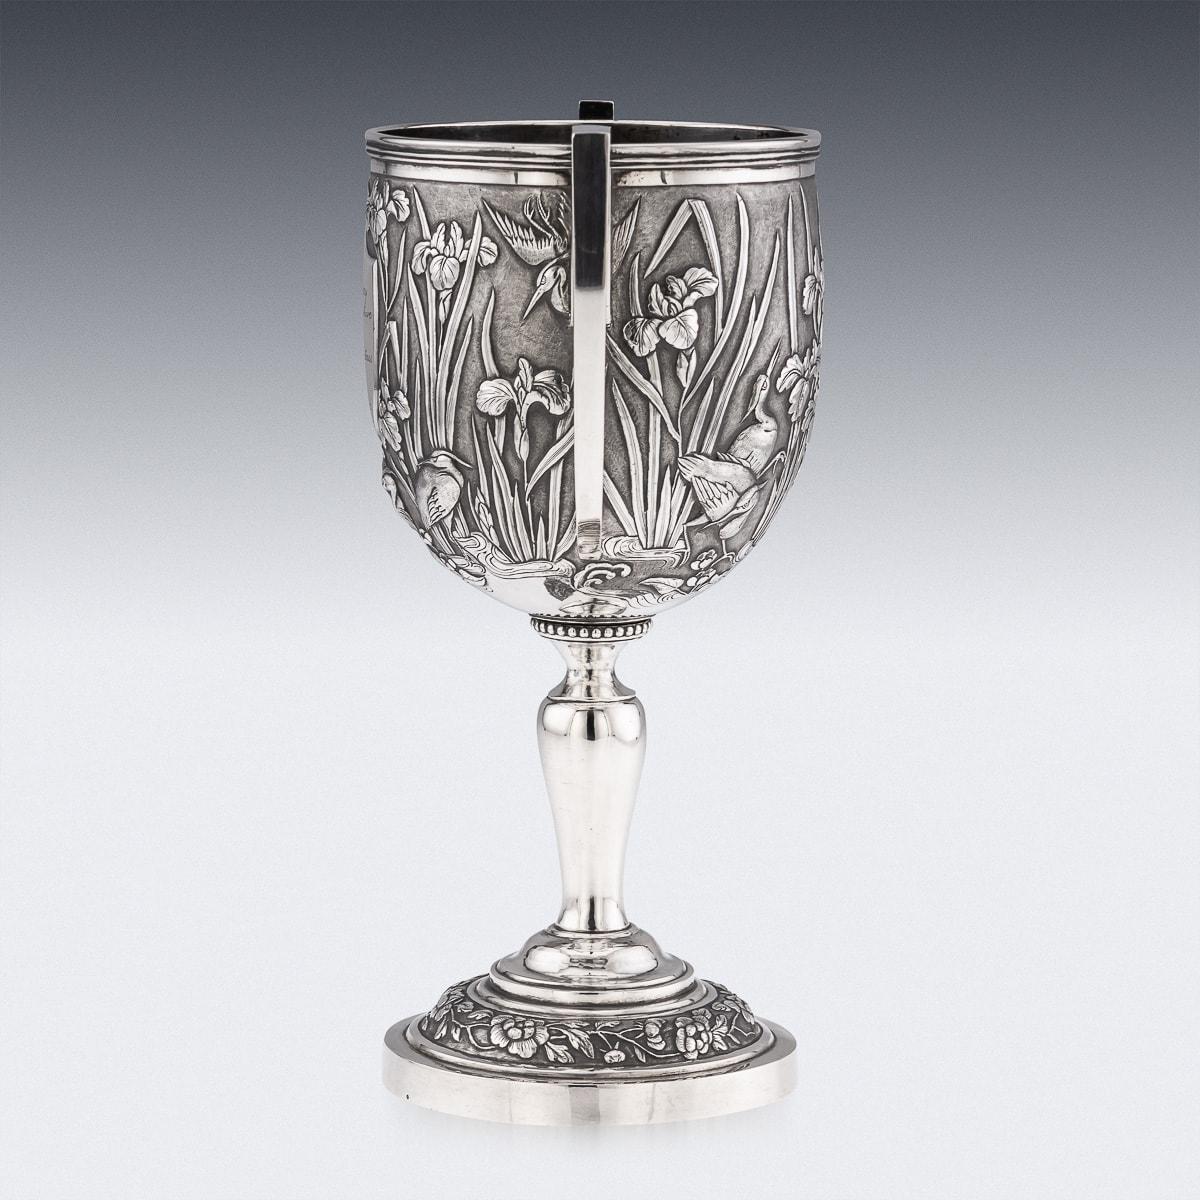 20th Century Chinese Export Solid Silver Trophy Cup, Woshing, Shanghai c.1900 In Good Condition For Sale In Royal Tunbridge Wells, Kent